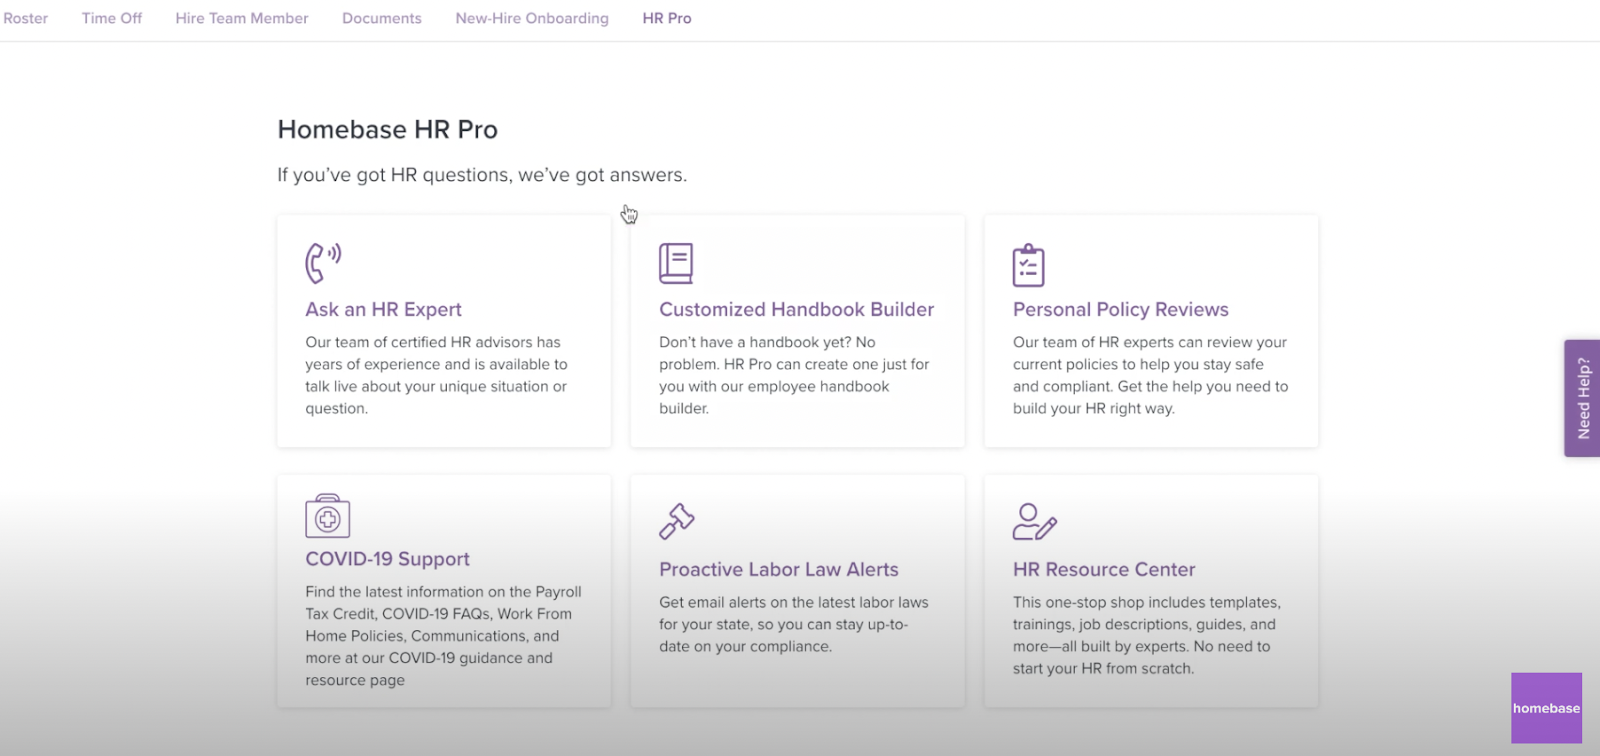 A screenshot of an interface from Homebase's HR pro tool.